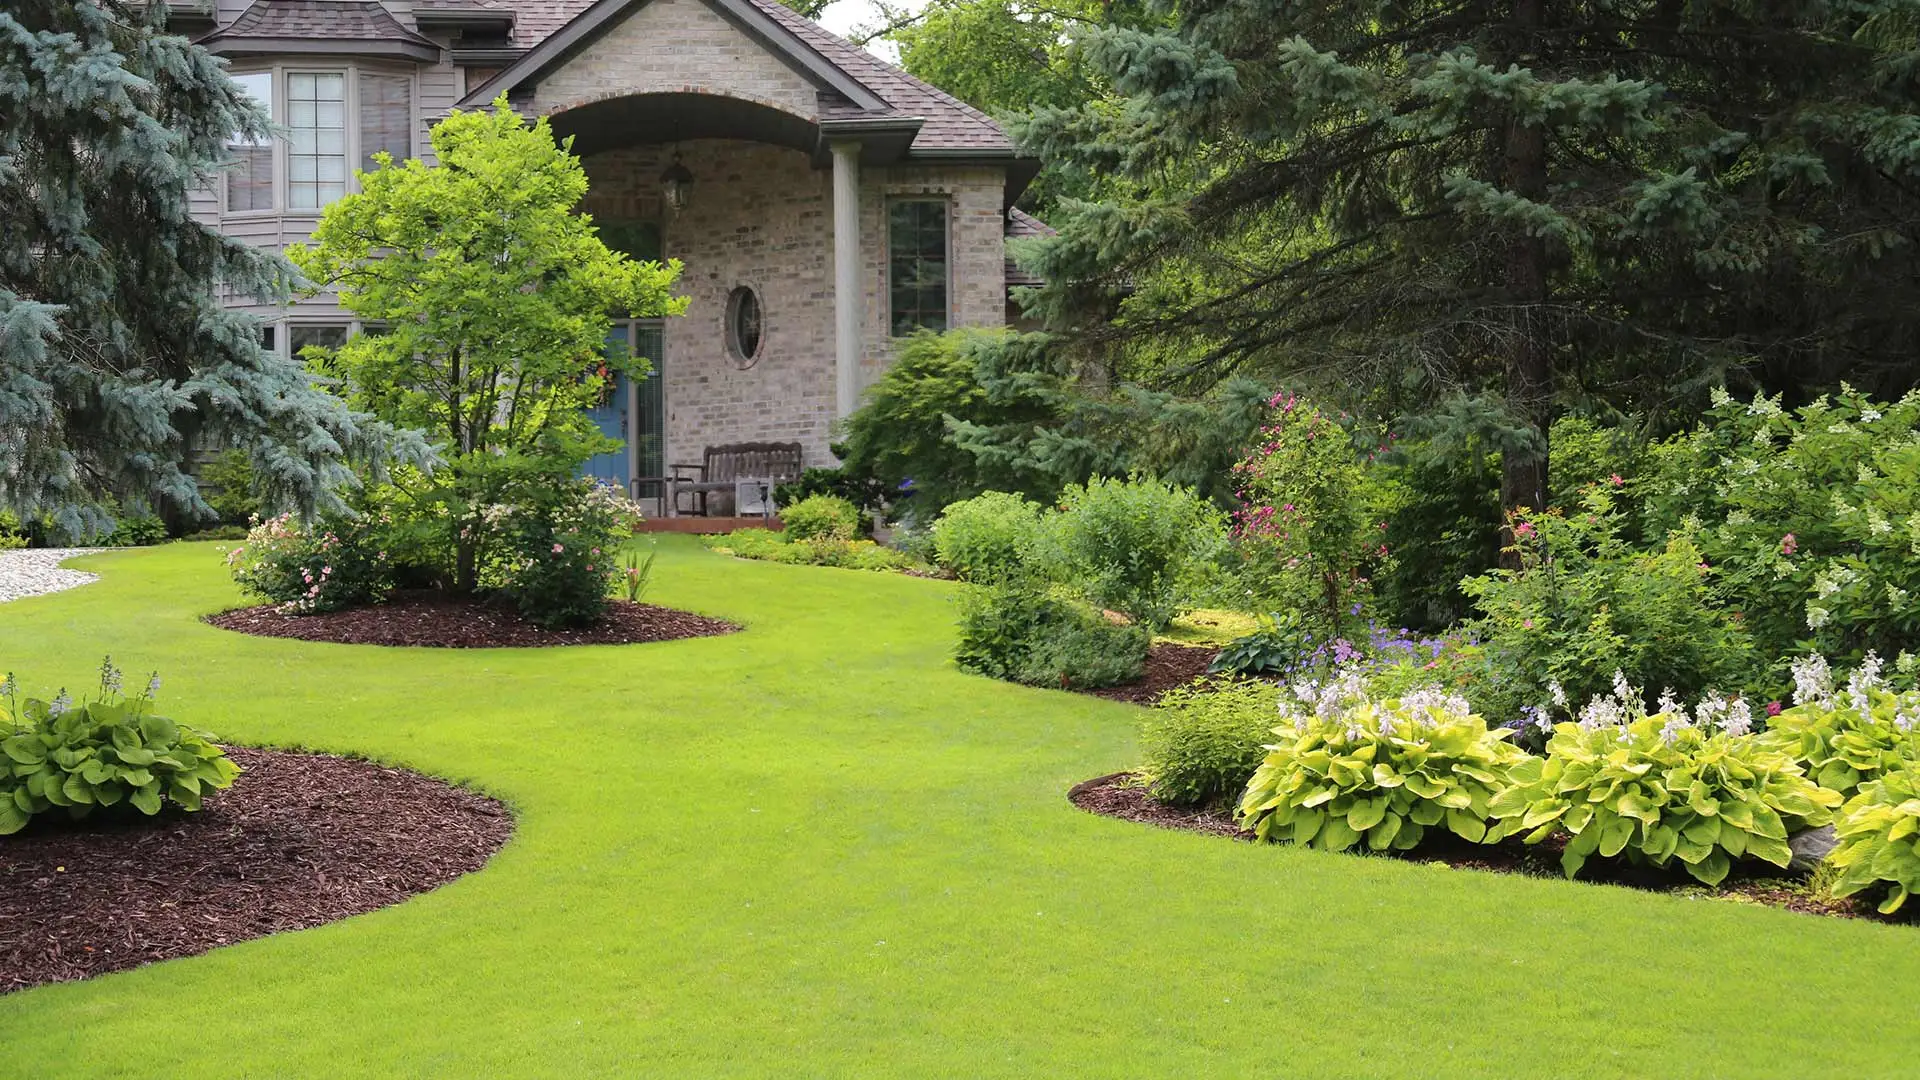 Lawn with regular lawn care services near East Lansing, MI.